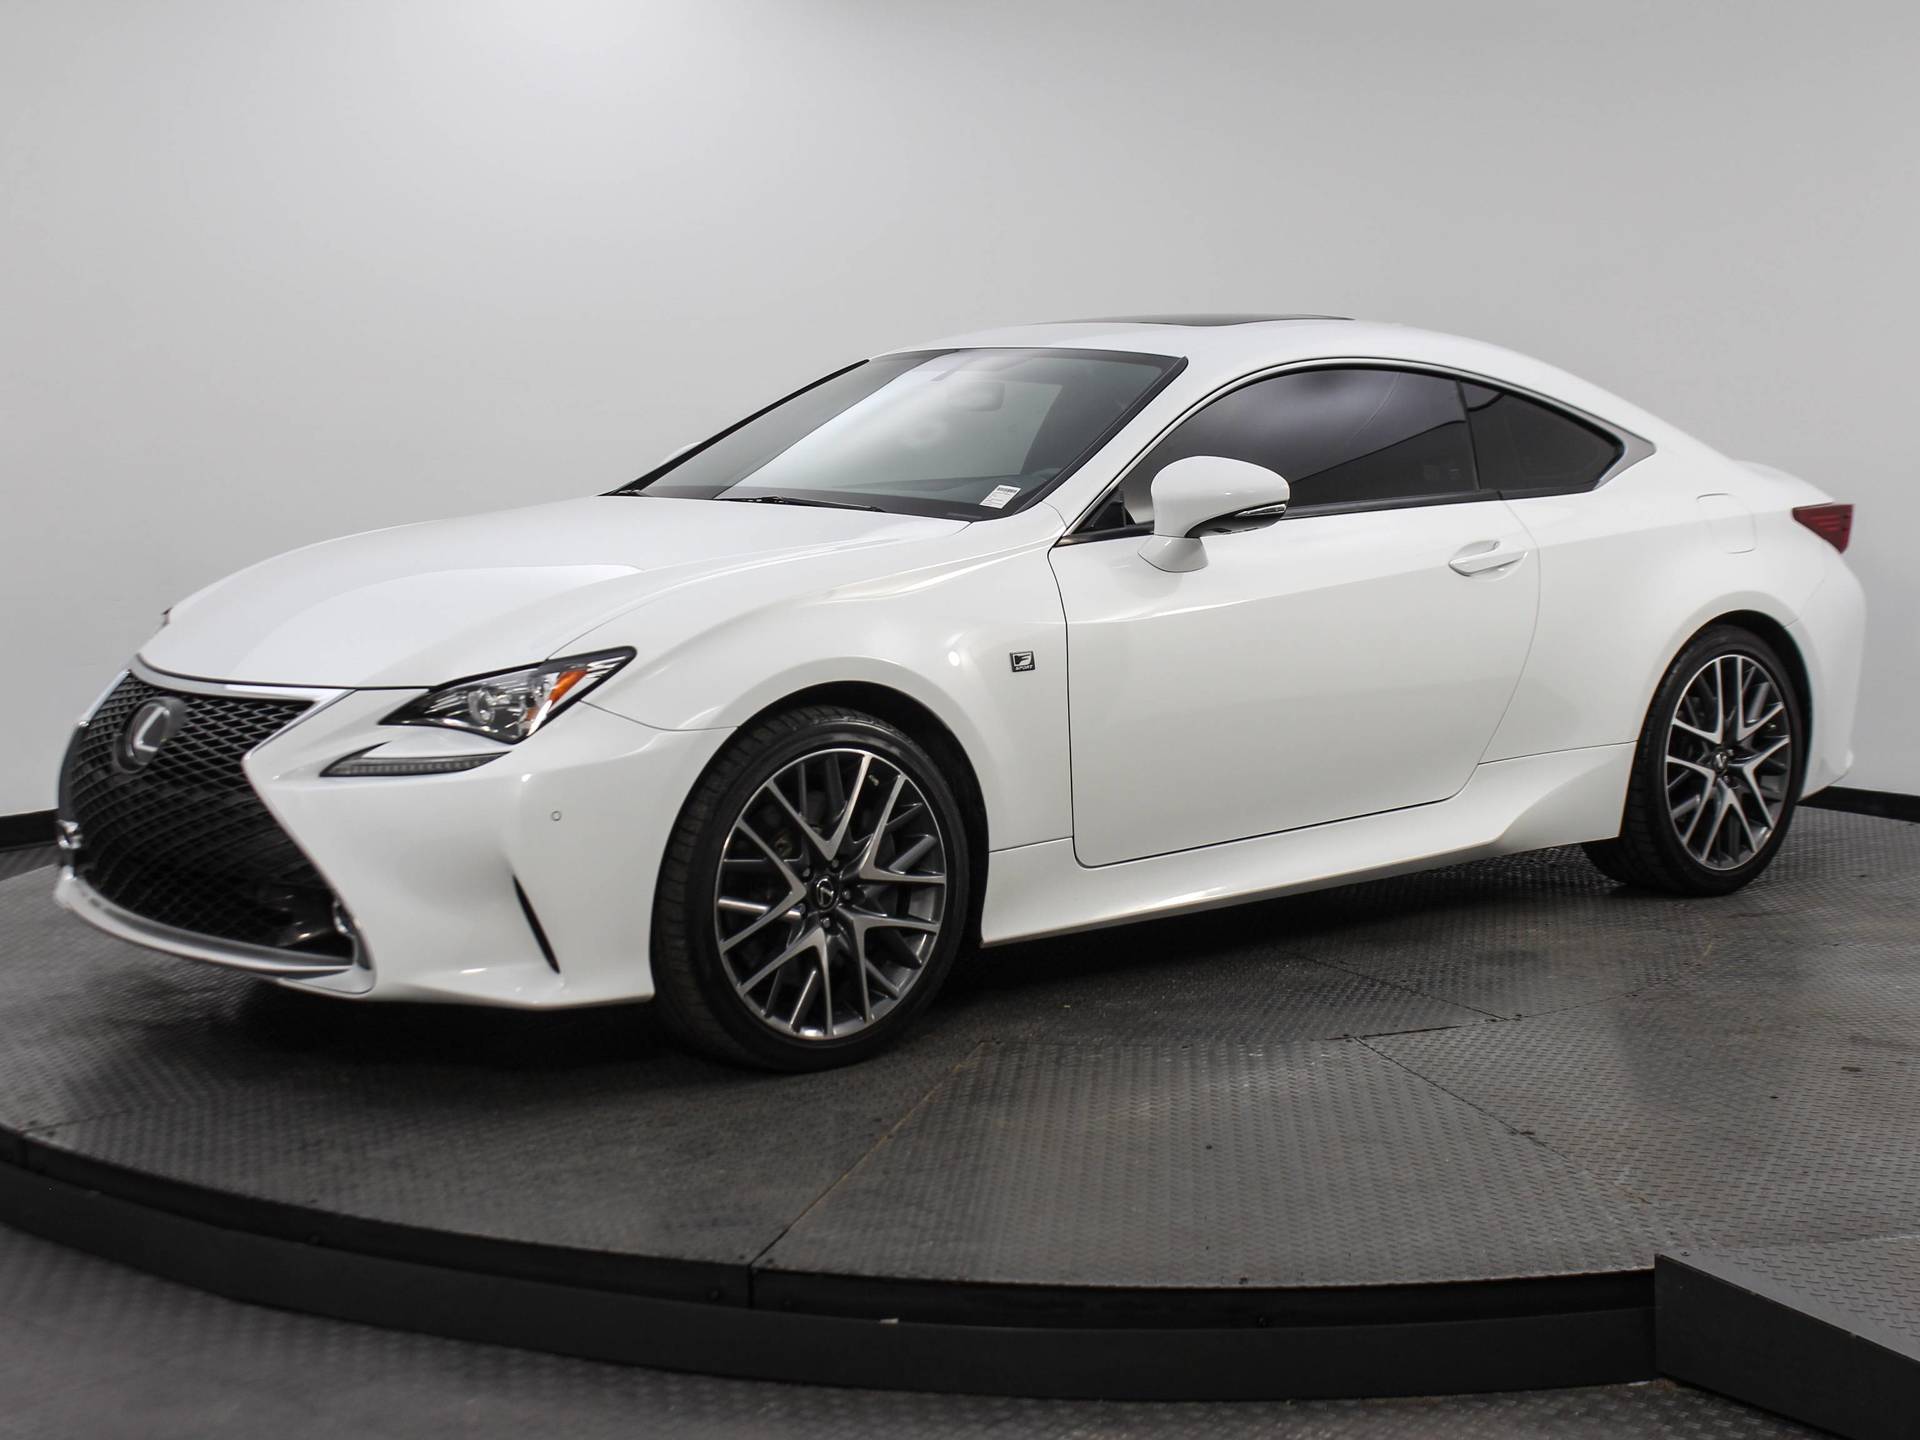 Used 2017 LEXUS RC RC 350 F SPORT for sale in MARGATE | 120448